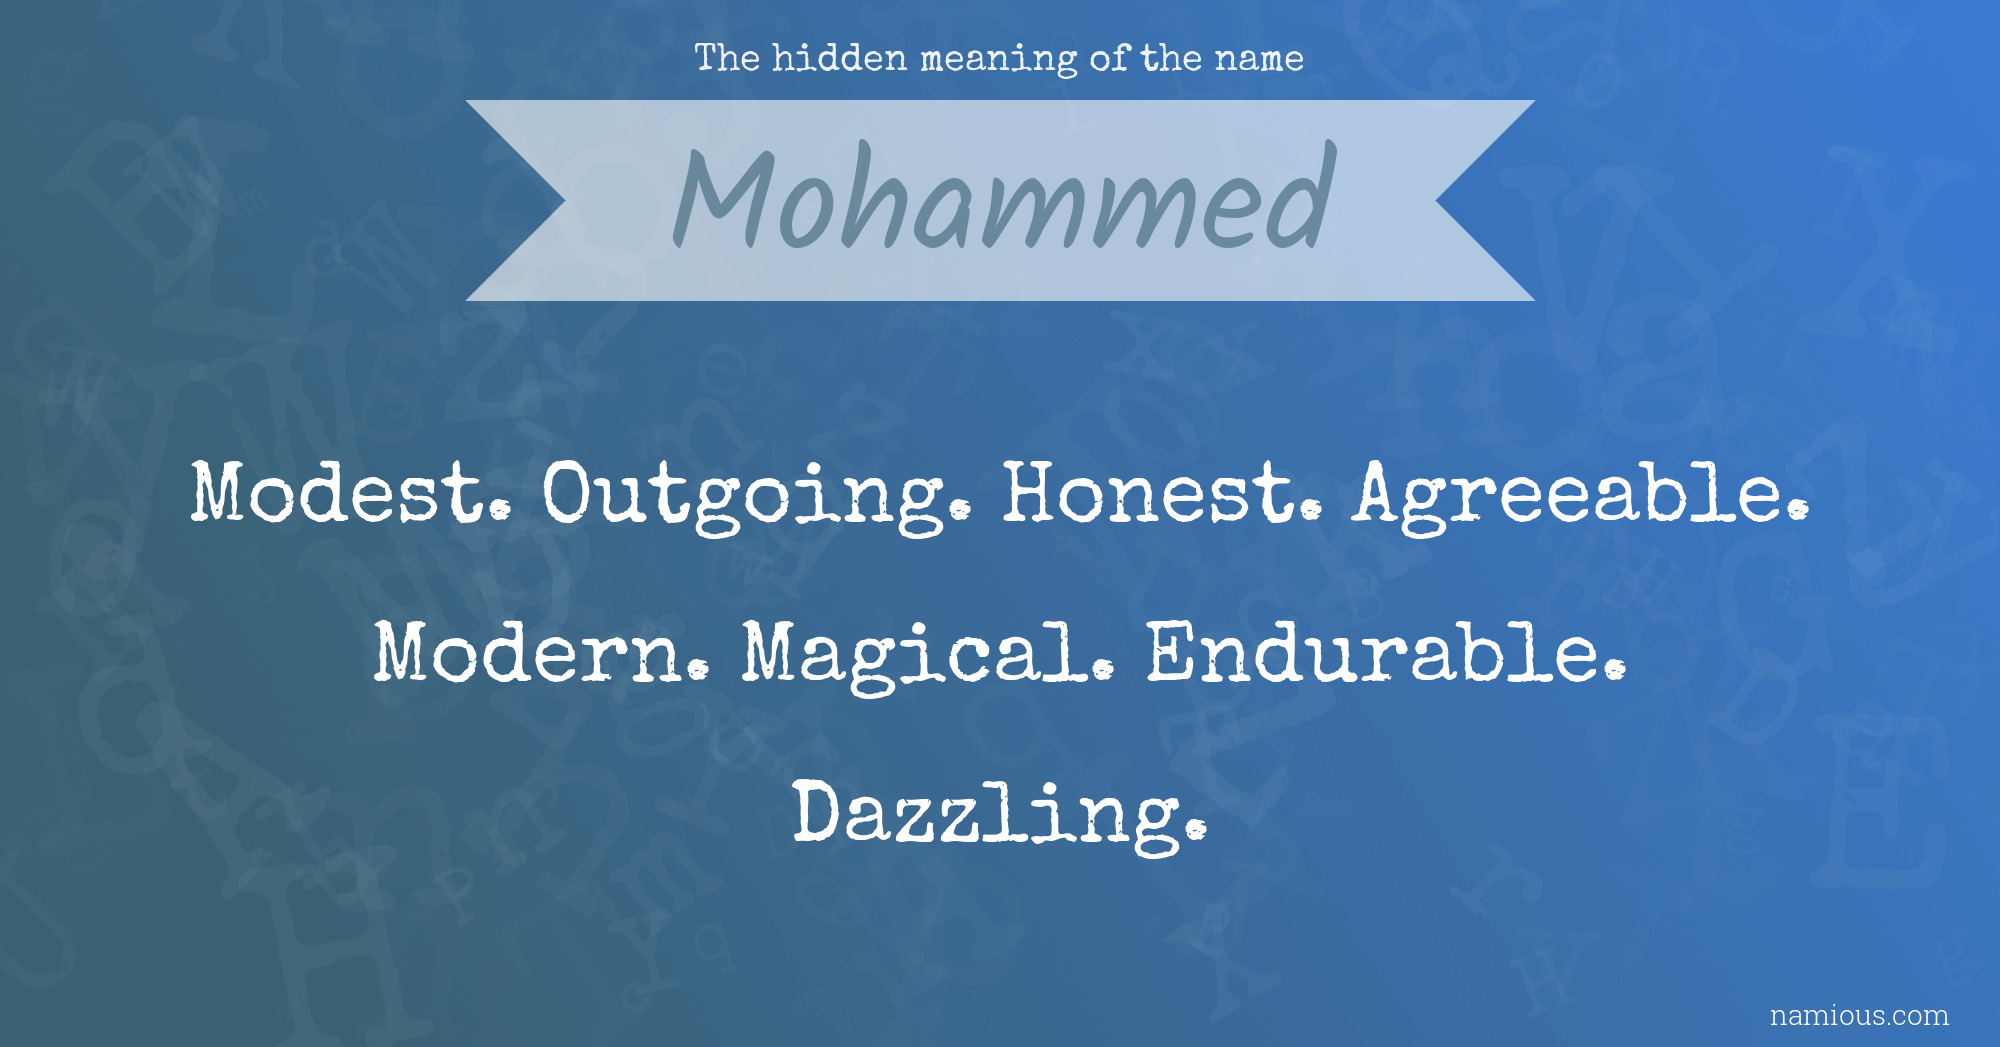 The hidden meaning of the name Mohammed